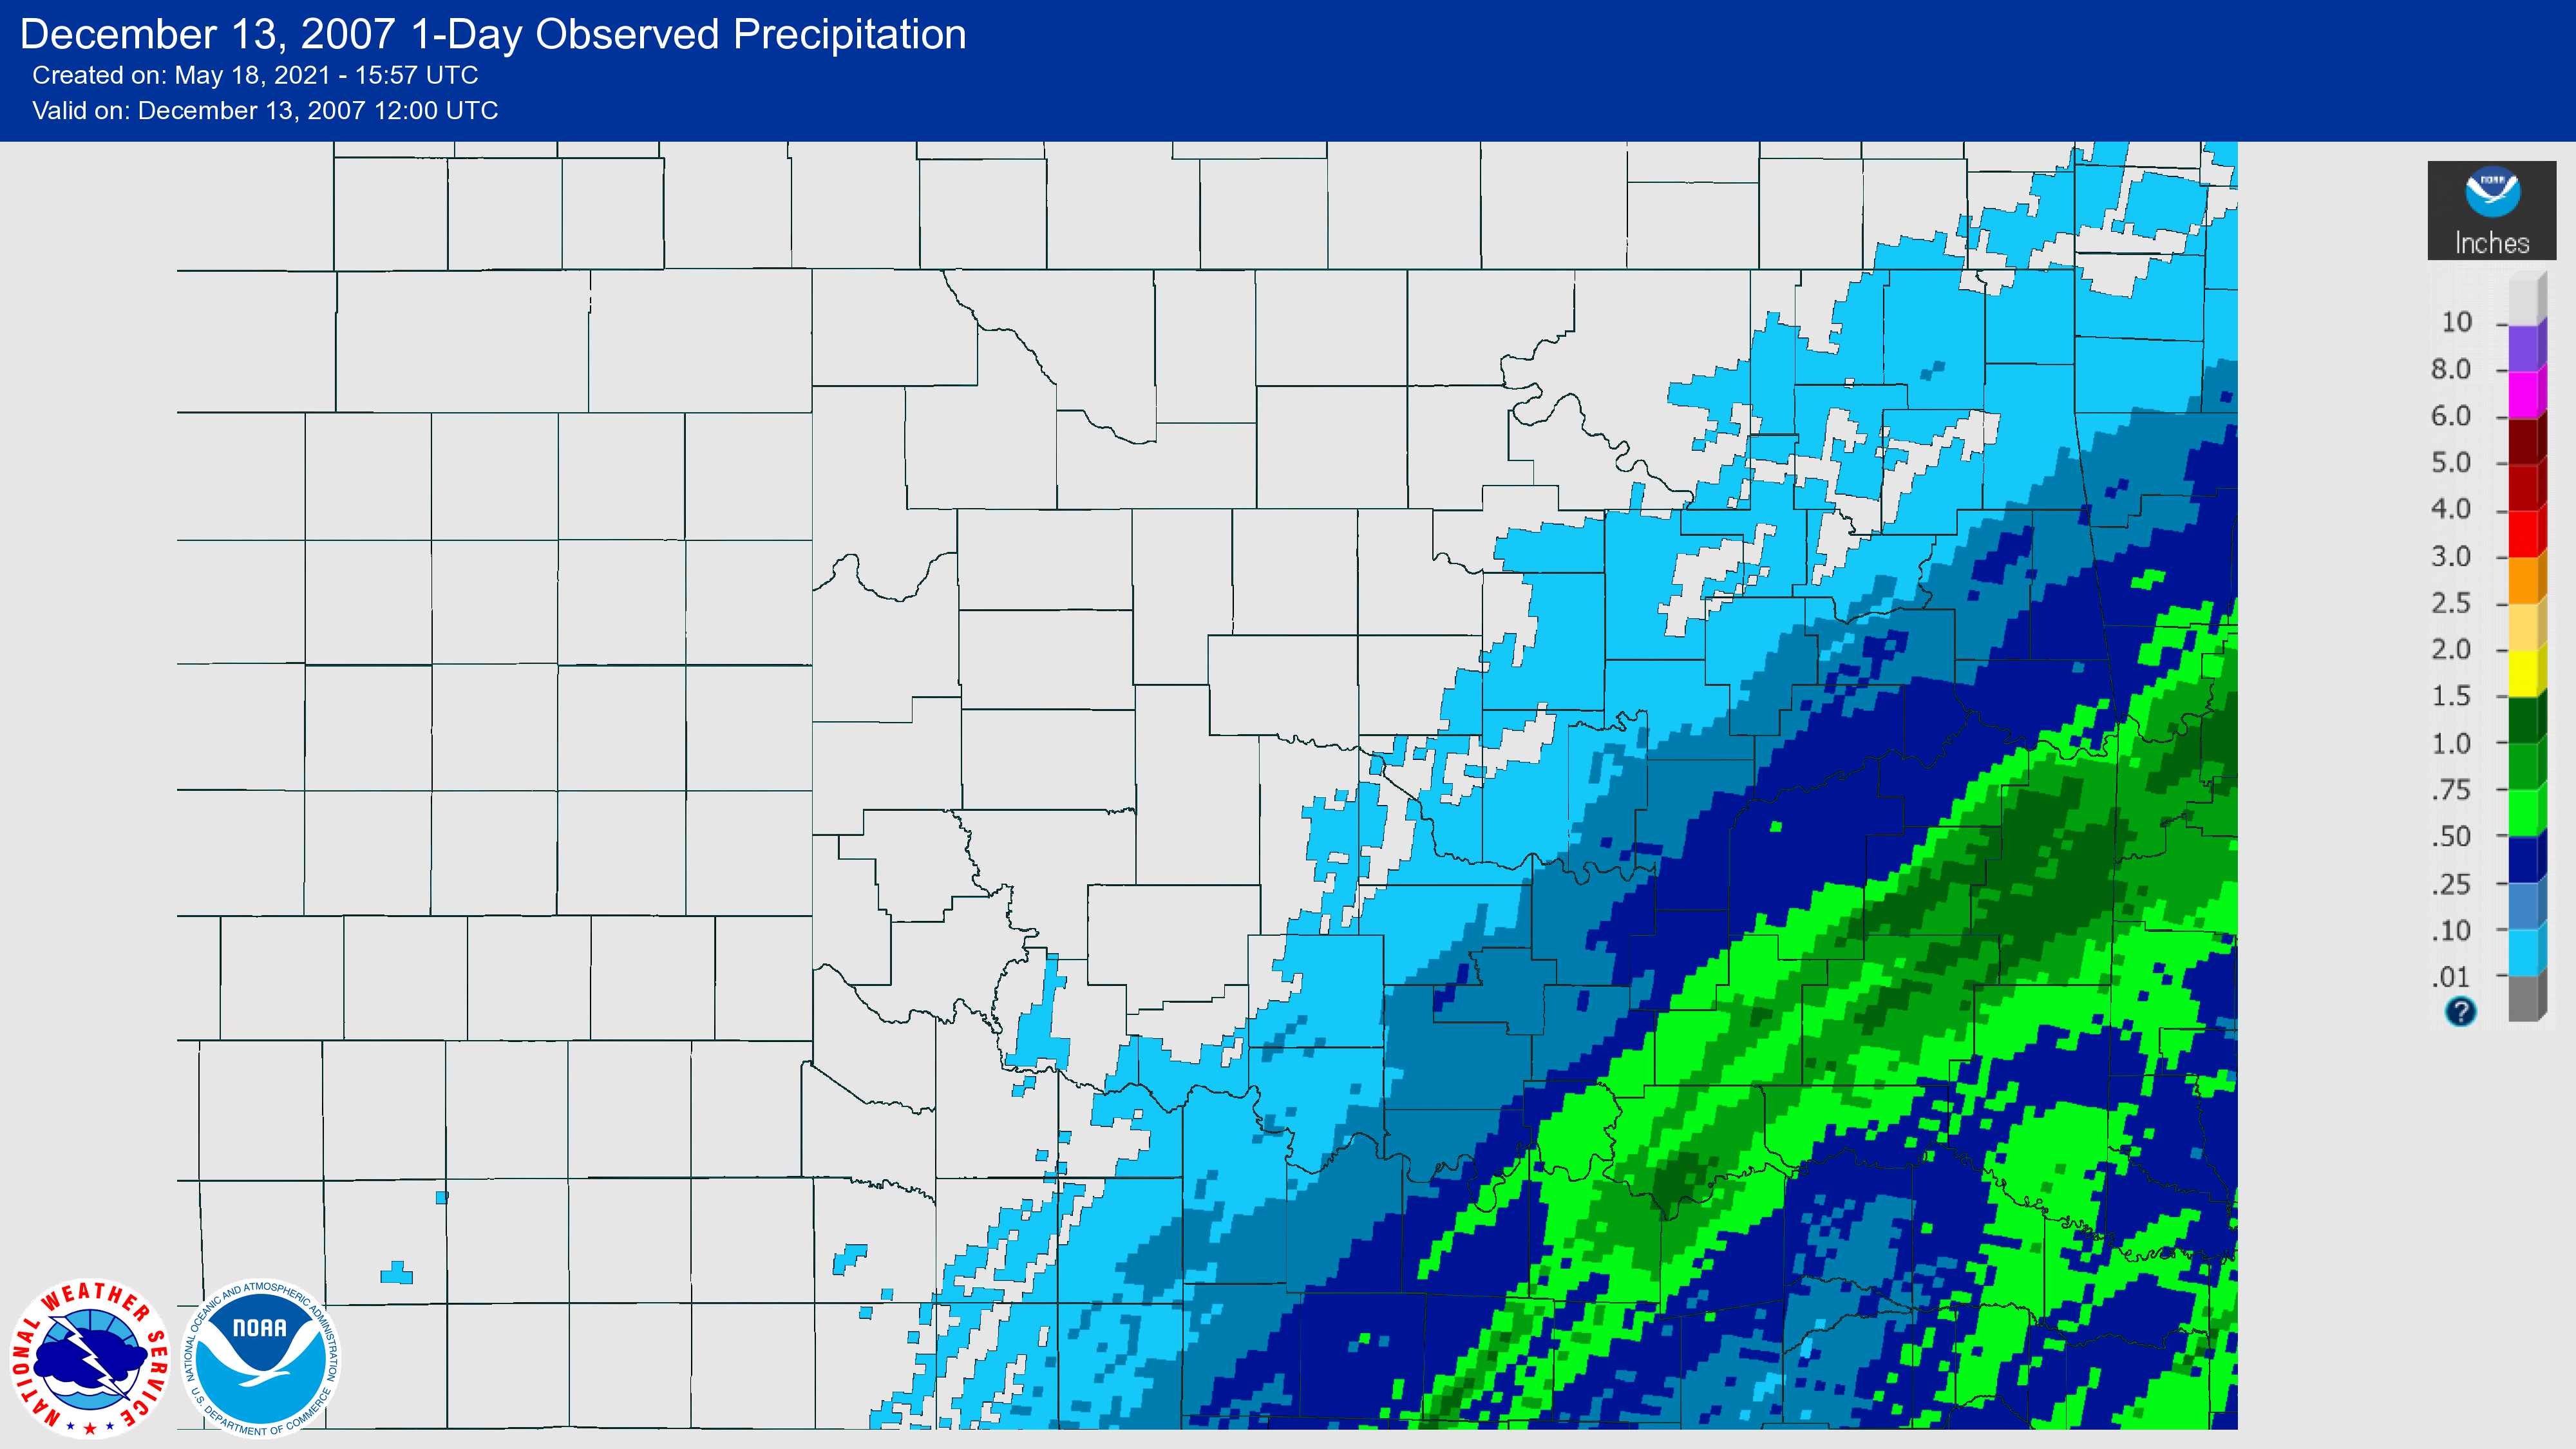 24-hour Precipitation Total ending at 6:00 AM CST on December 13, 2007 for the NWS Norman, Oklahoma Forecast Area